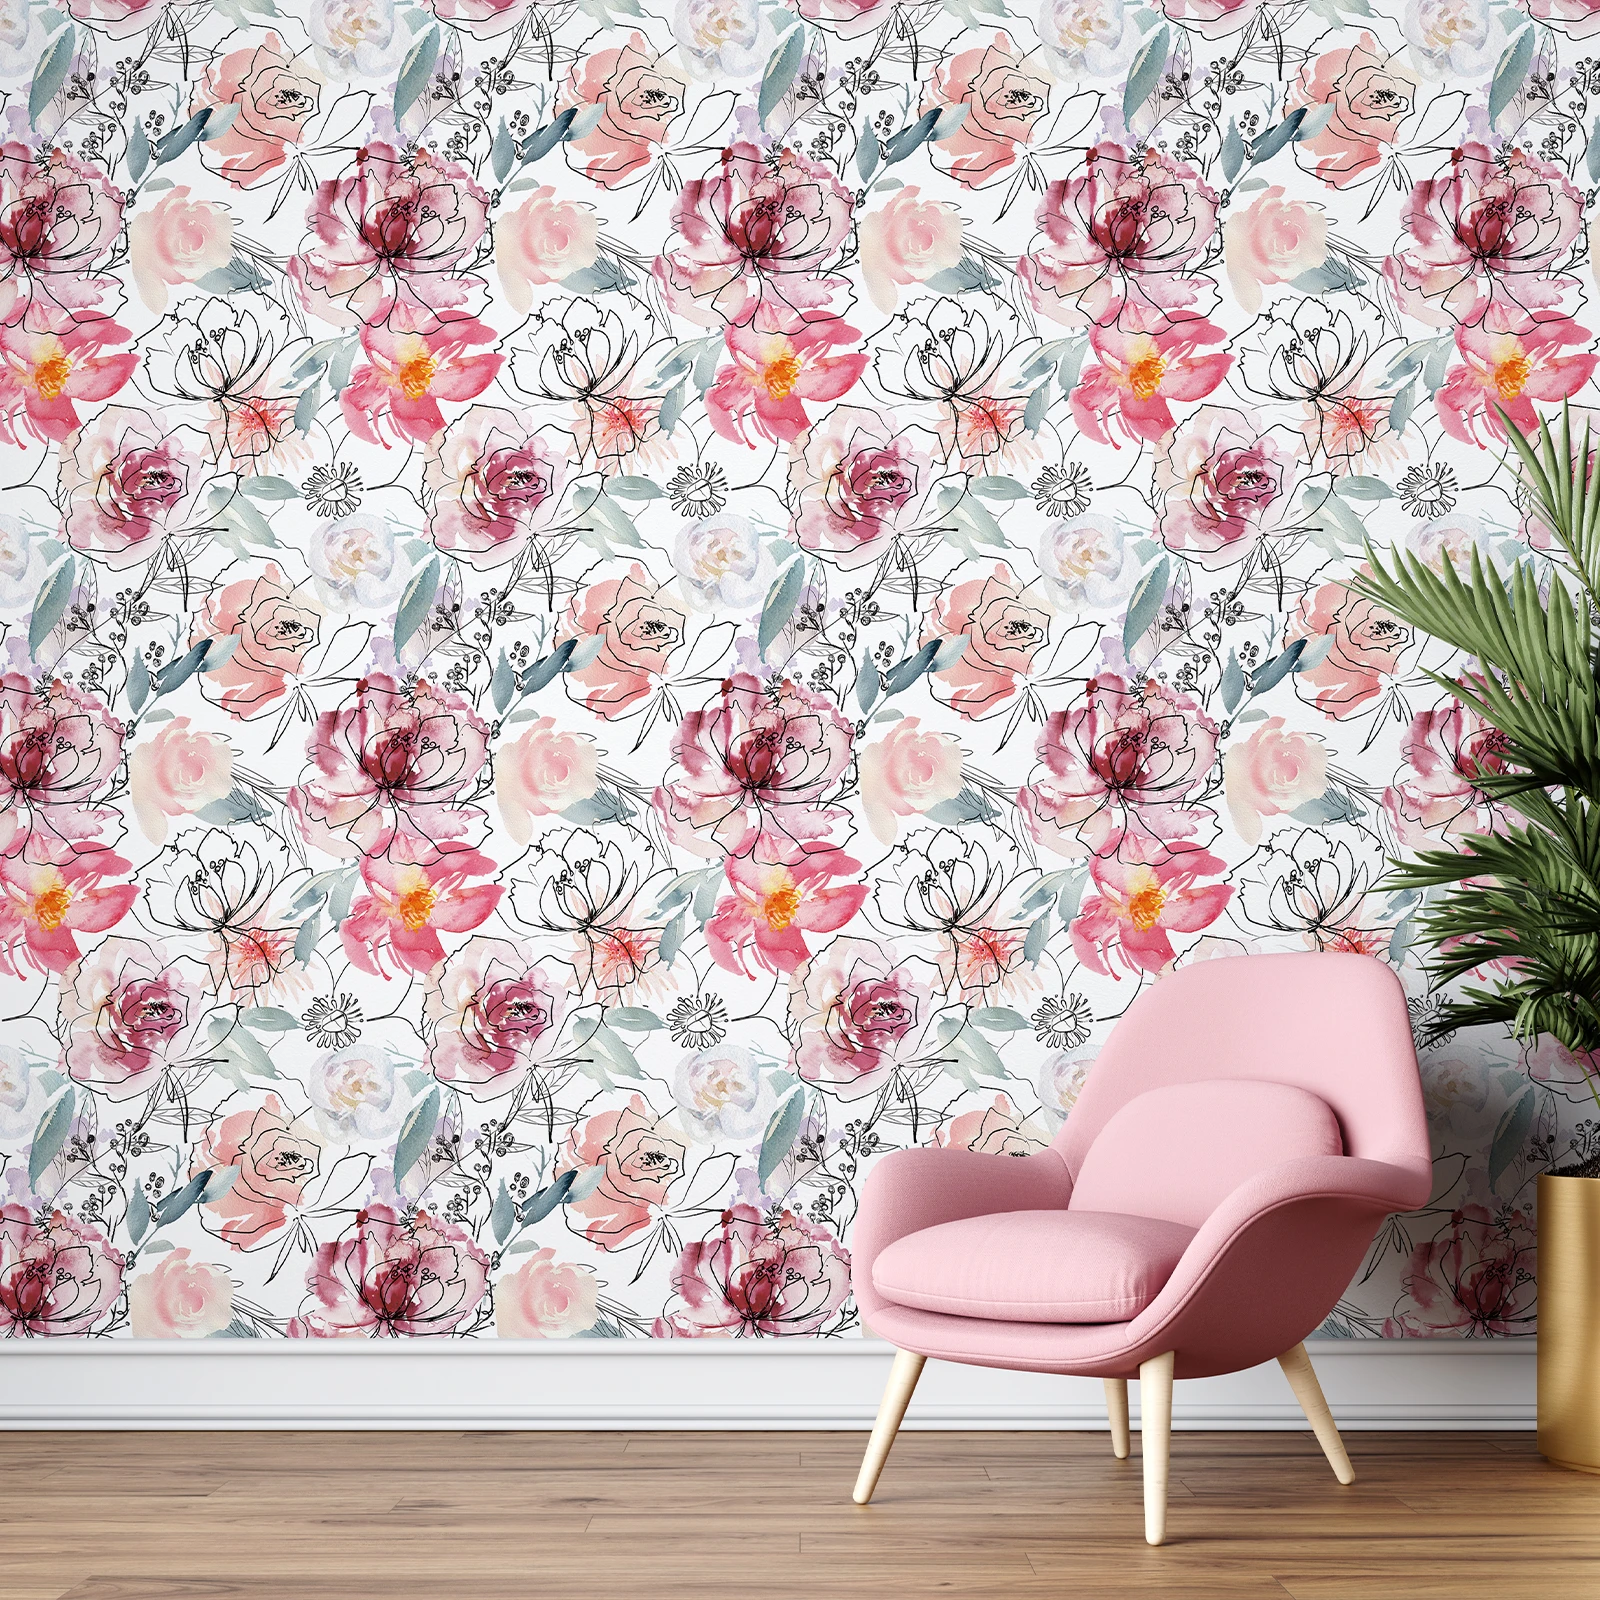 Watercolor Pink Floral Line Wallpaper Self-adhesive Furniture PVC Cabinet Sticker Peel And Stick Flower Kitchen Bathroom Decor